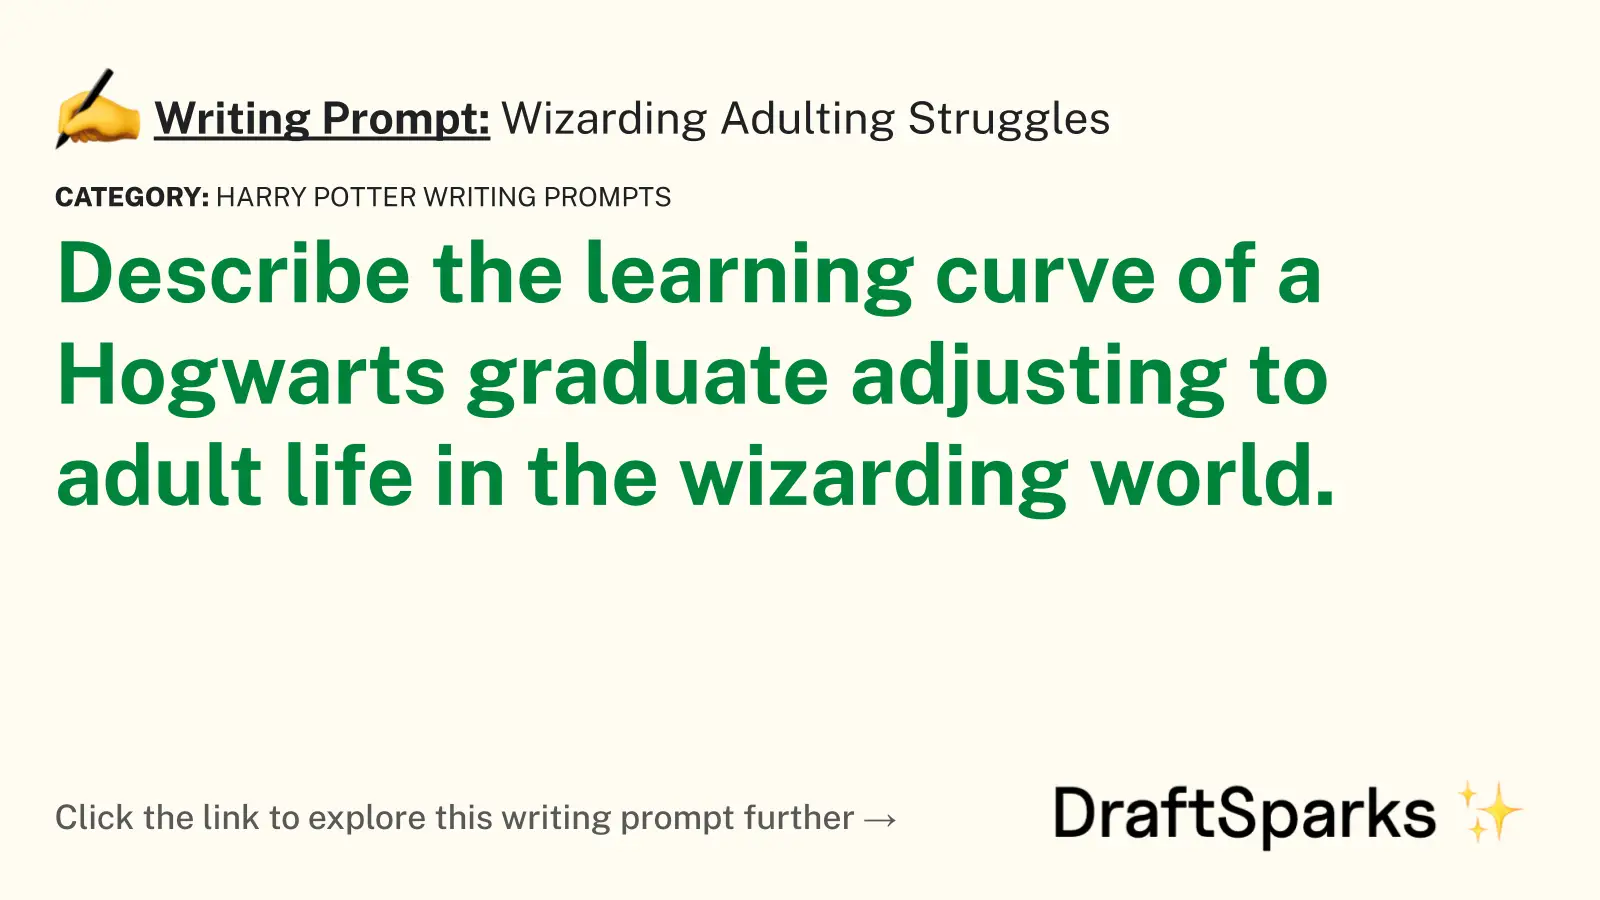 Wizarding Adulting Struggles